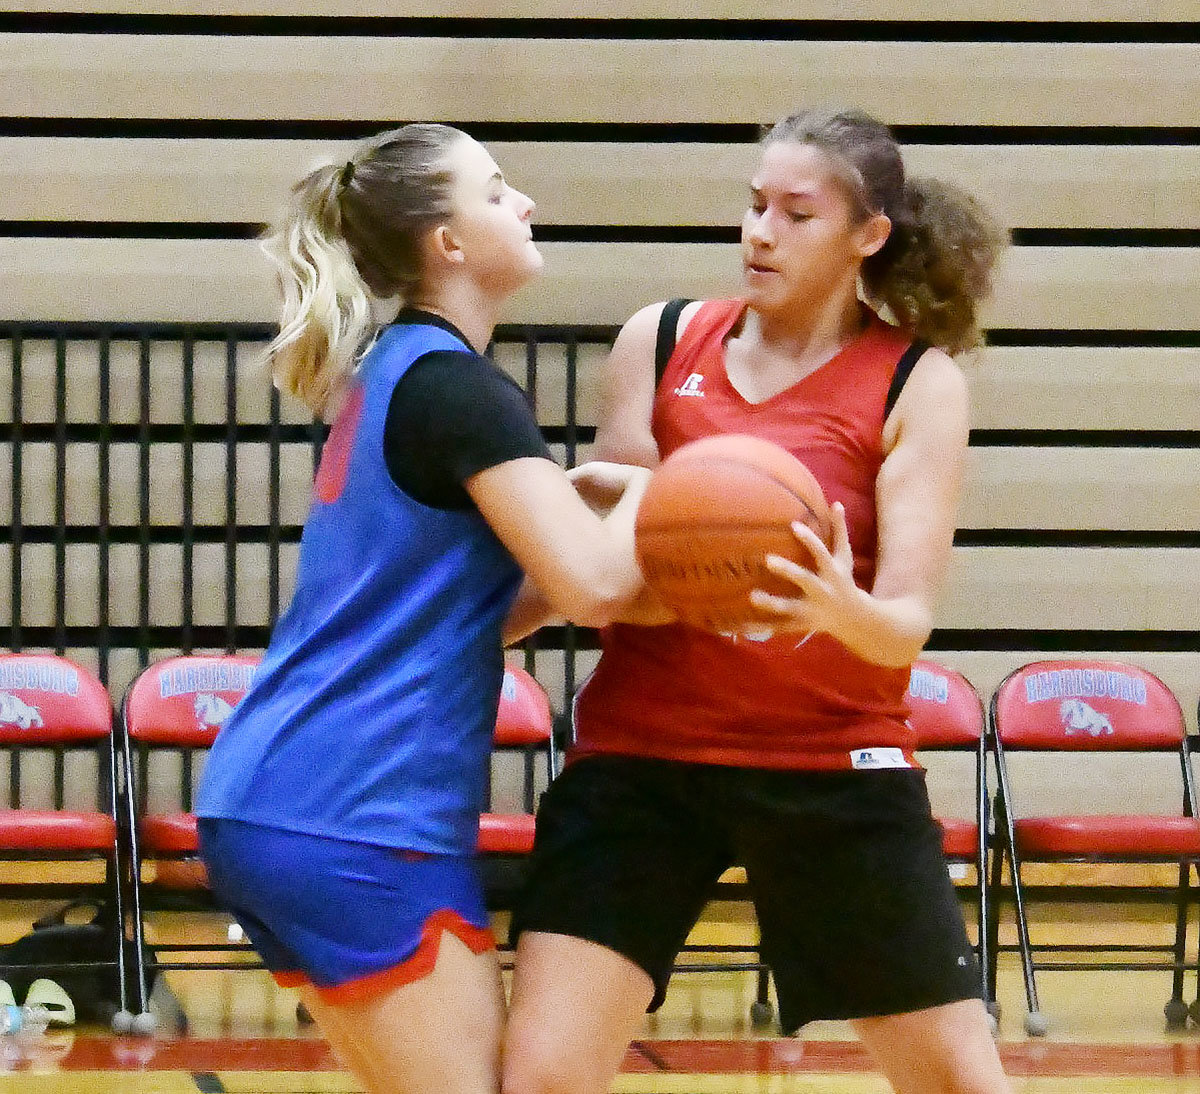 Moberly's Savanna Orscheln bodies up against a player from Mexico as the two North Central Missouri Conference schools squared off in a summer scrimmage Wednesday in Harrisburg.